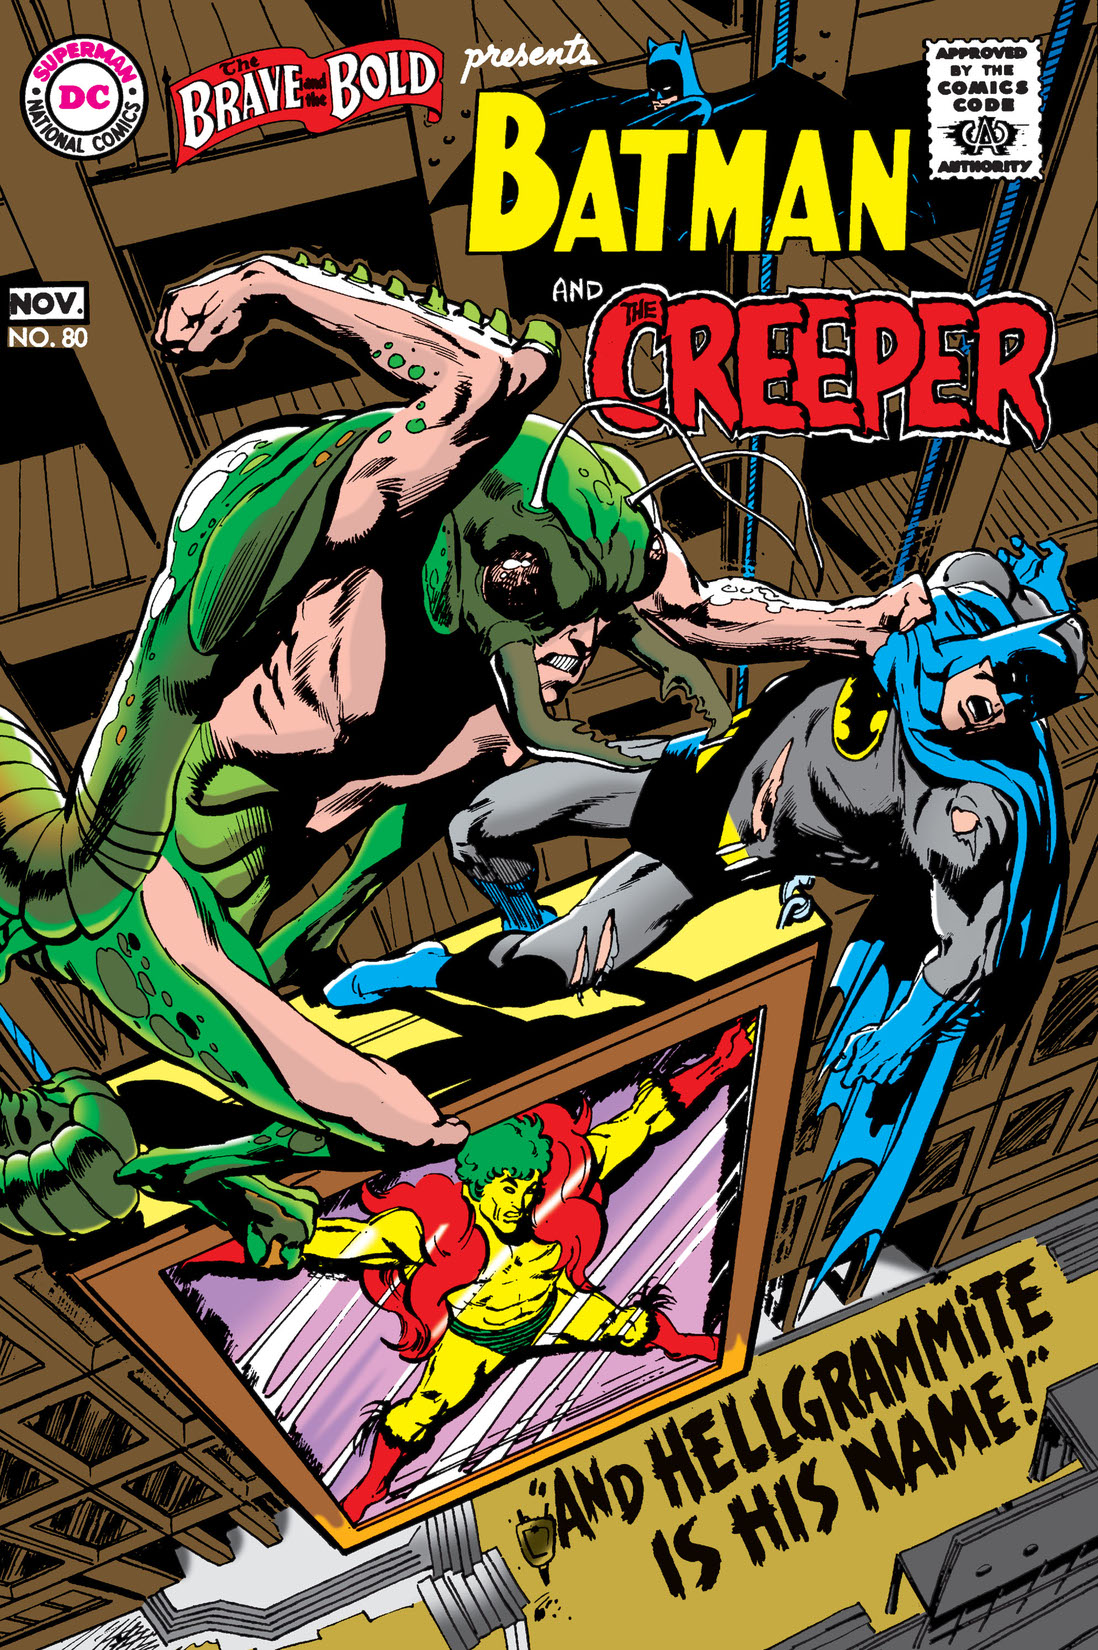 The Brave and the Bold (1955-) #80 preview images